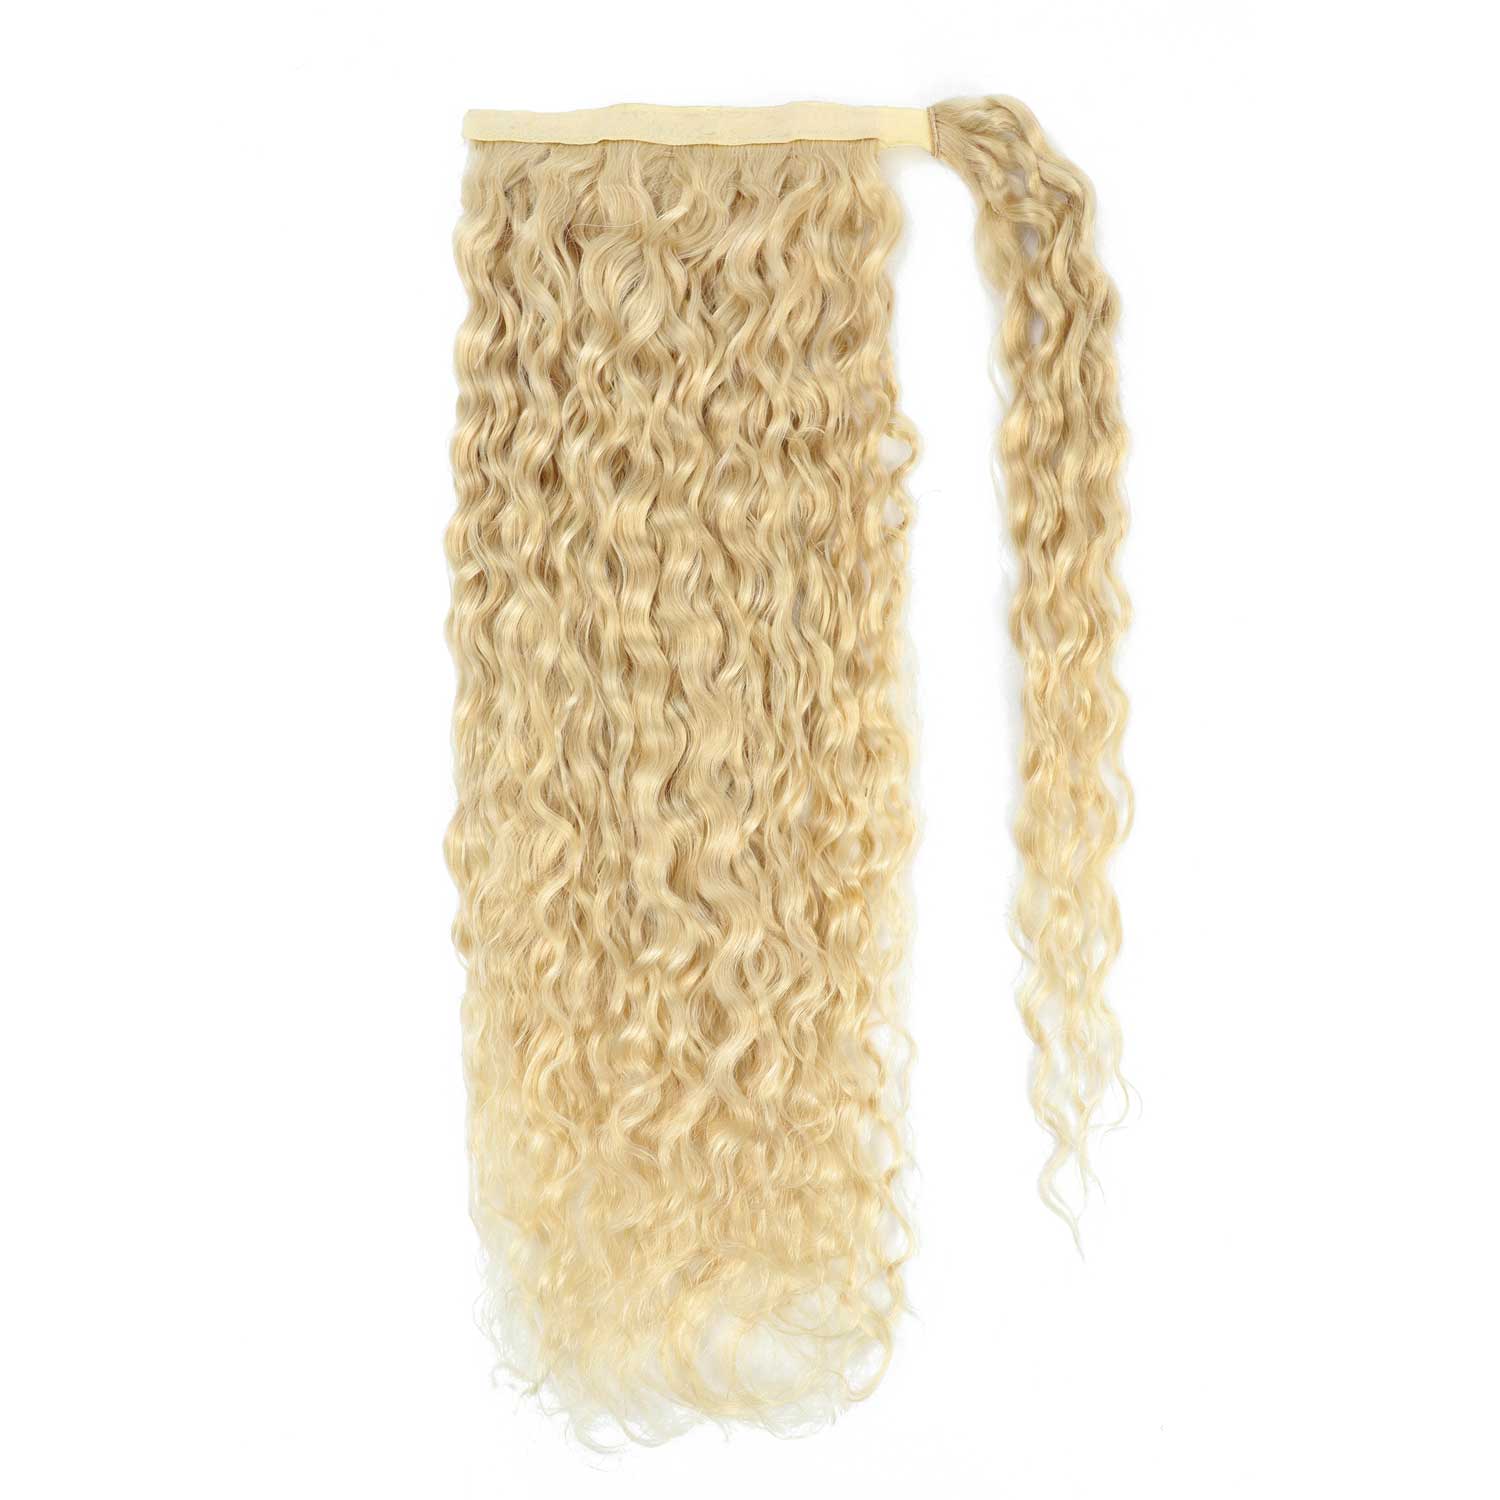 Curly Ponytail Human Hair Extensions #1001 Pearl Blonde